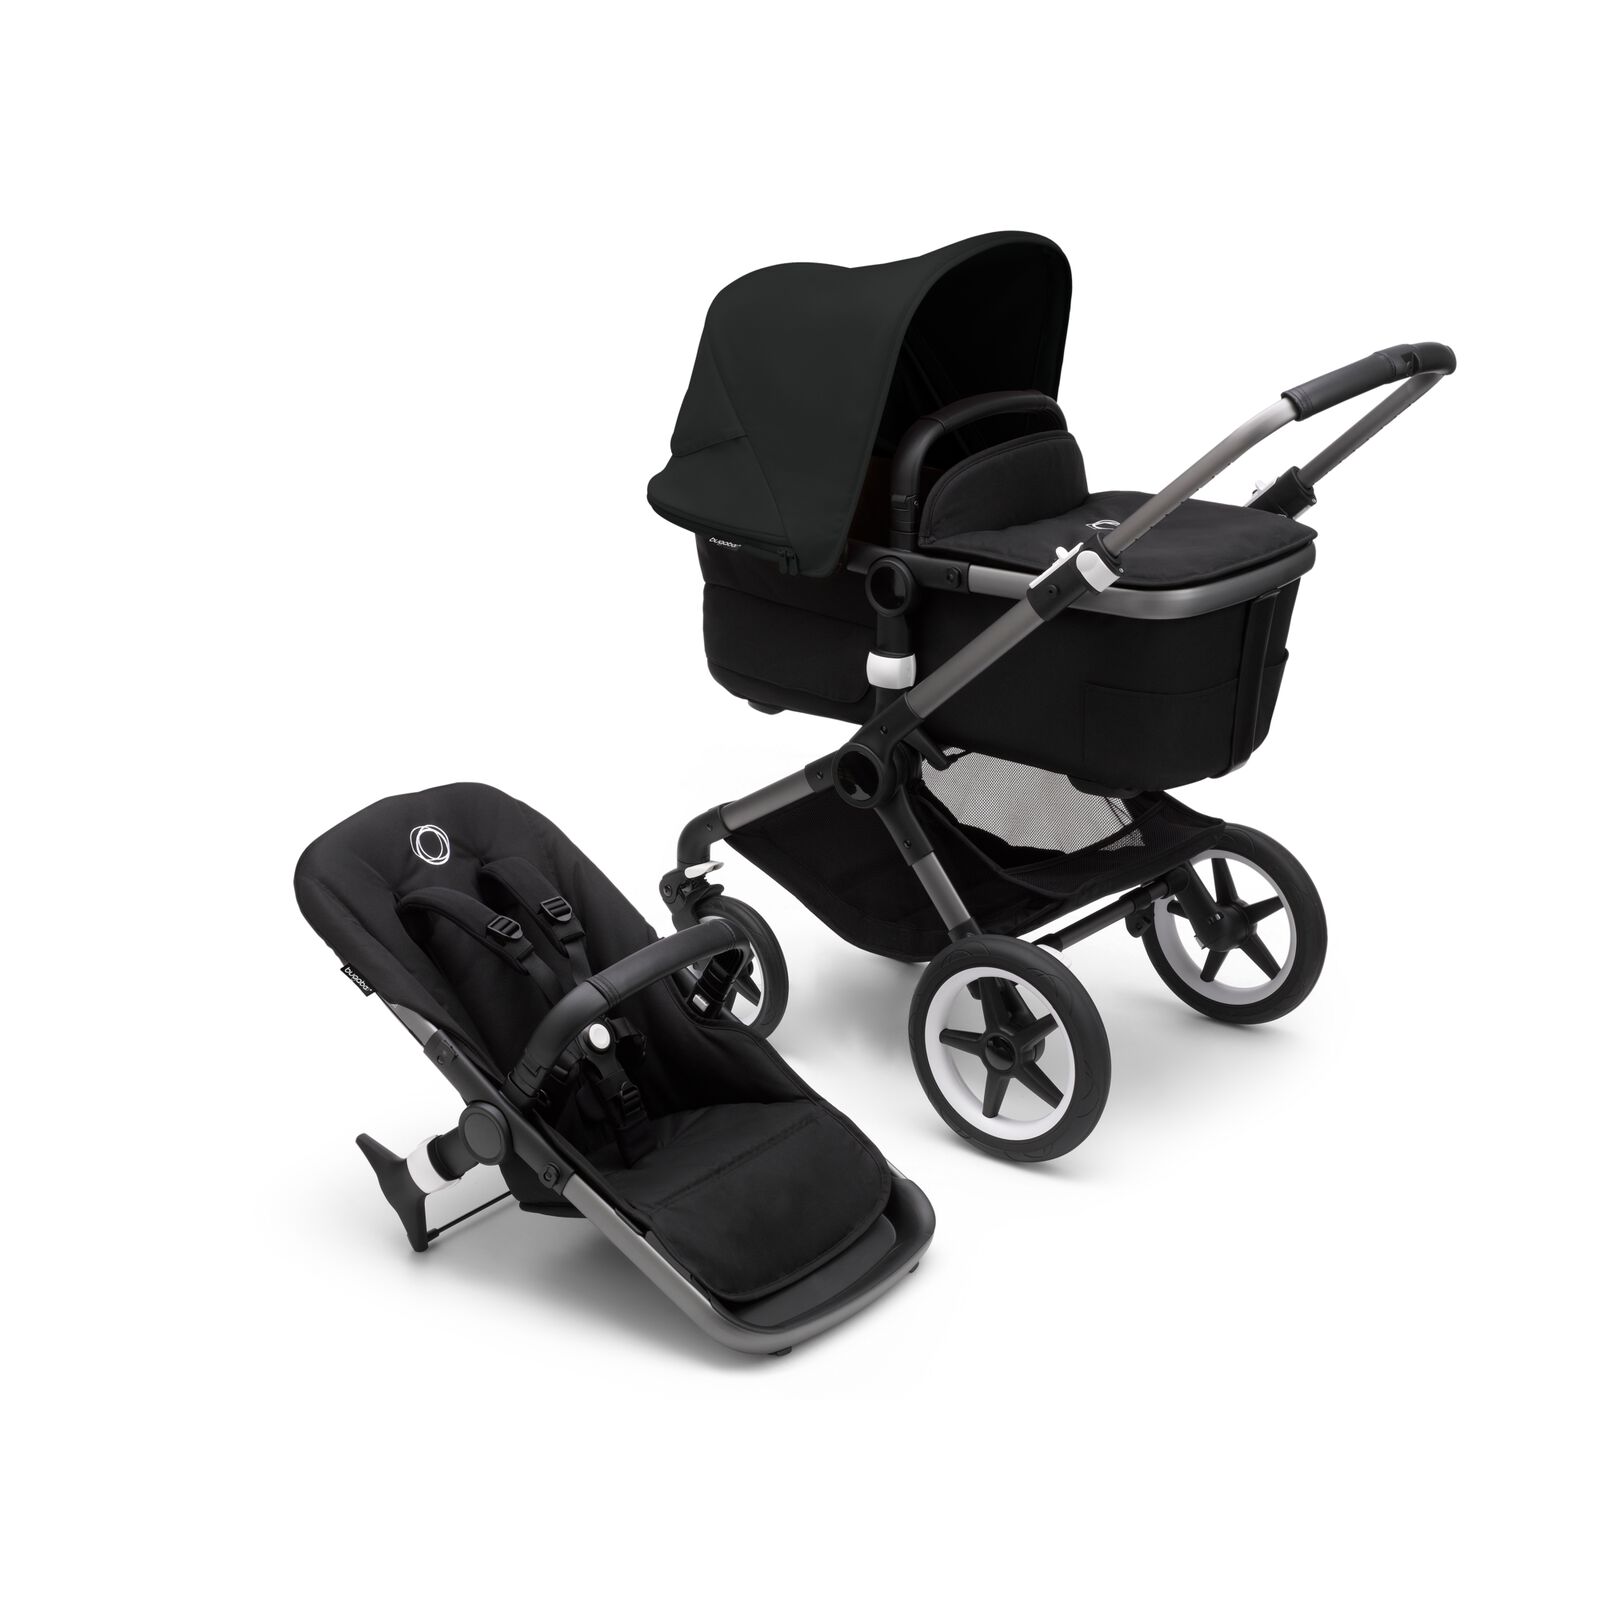 Bugaboo Fox 3 bassinet and seat stroller with graphite frame, black fabrics, and black sun canopy.